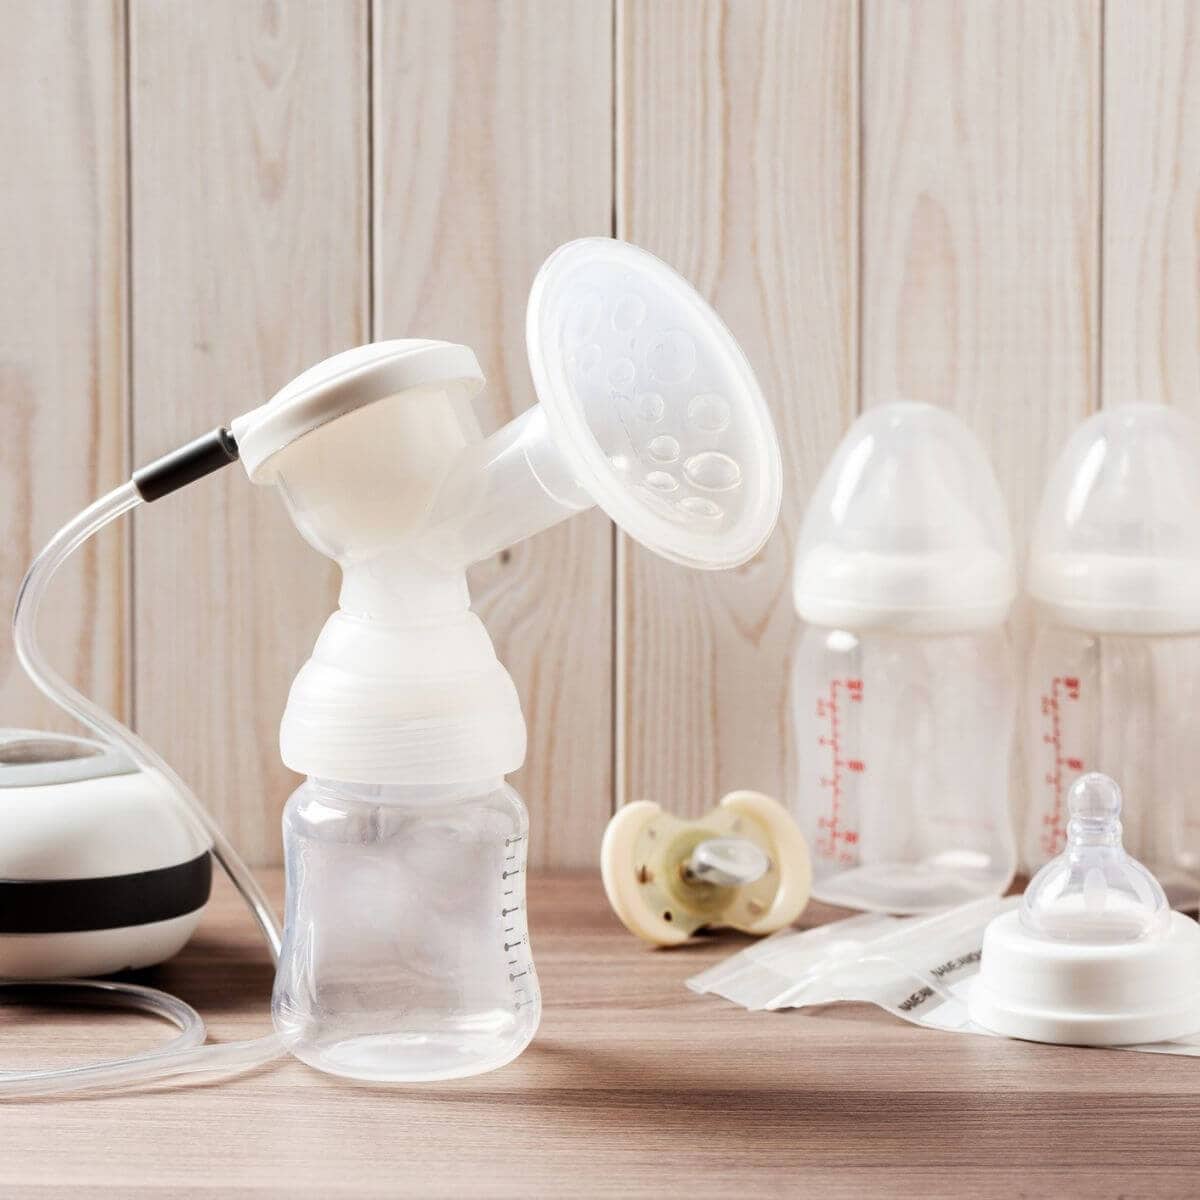 A breastpump is sitting on a light wood table with a light yellow pacifier and two baby bottles.